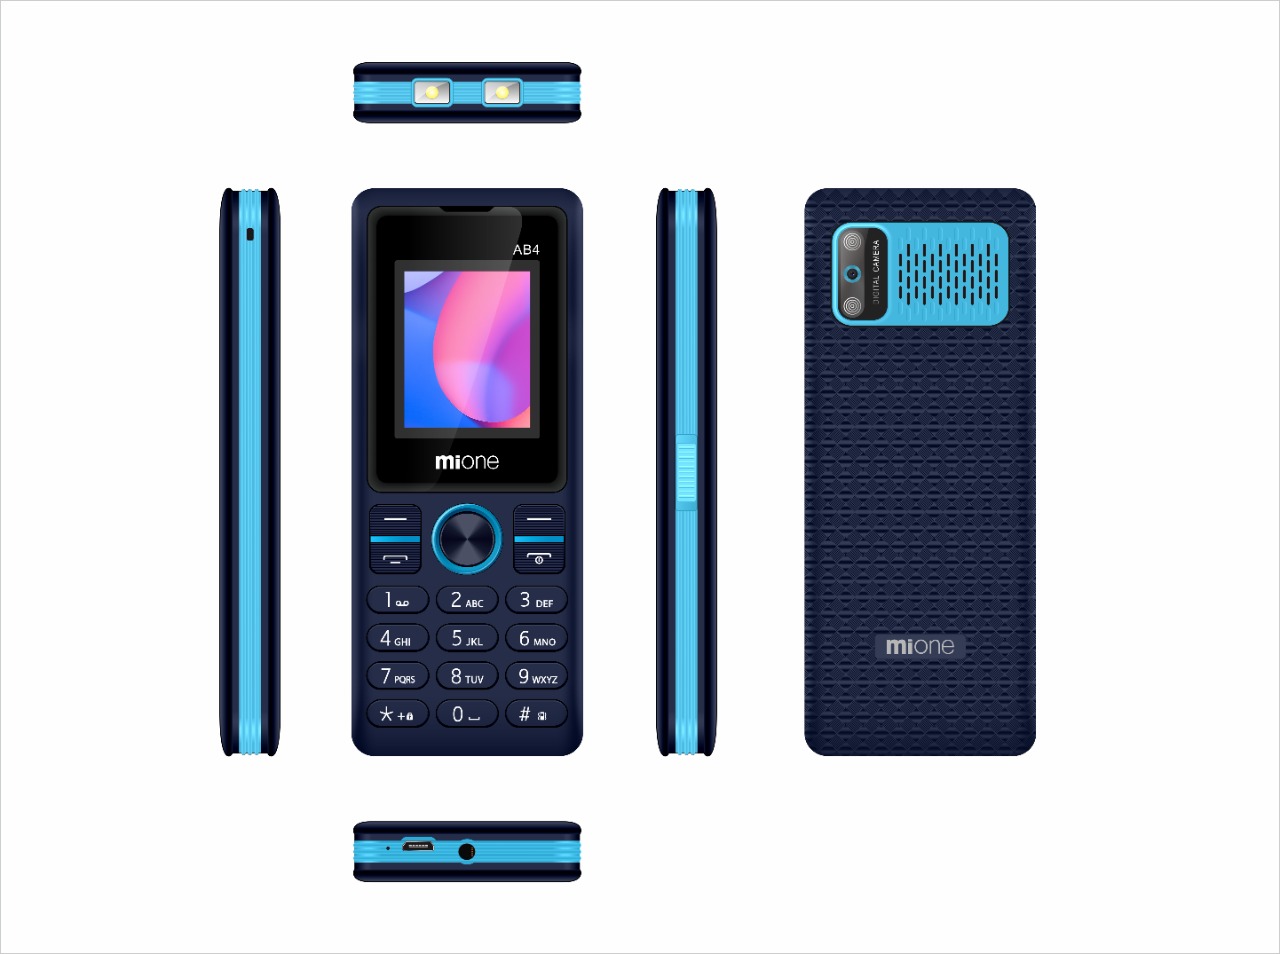 Mione AB4 feature phone